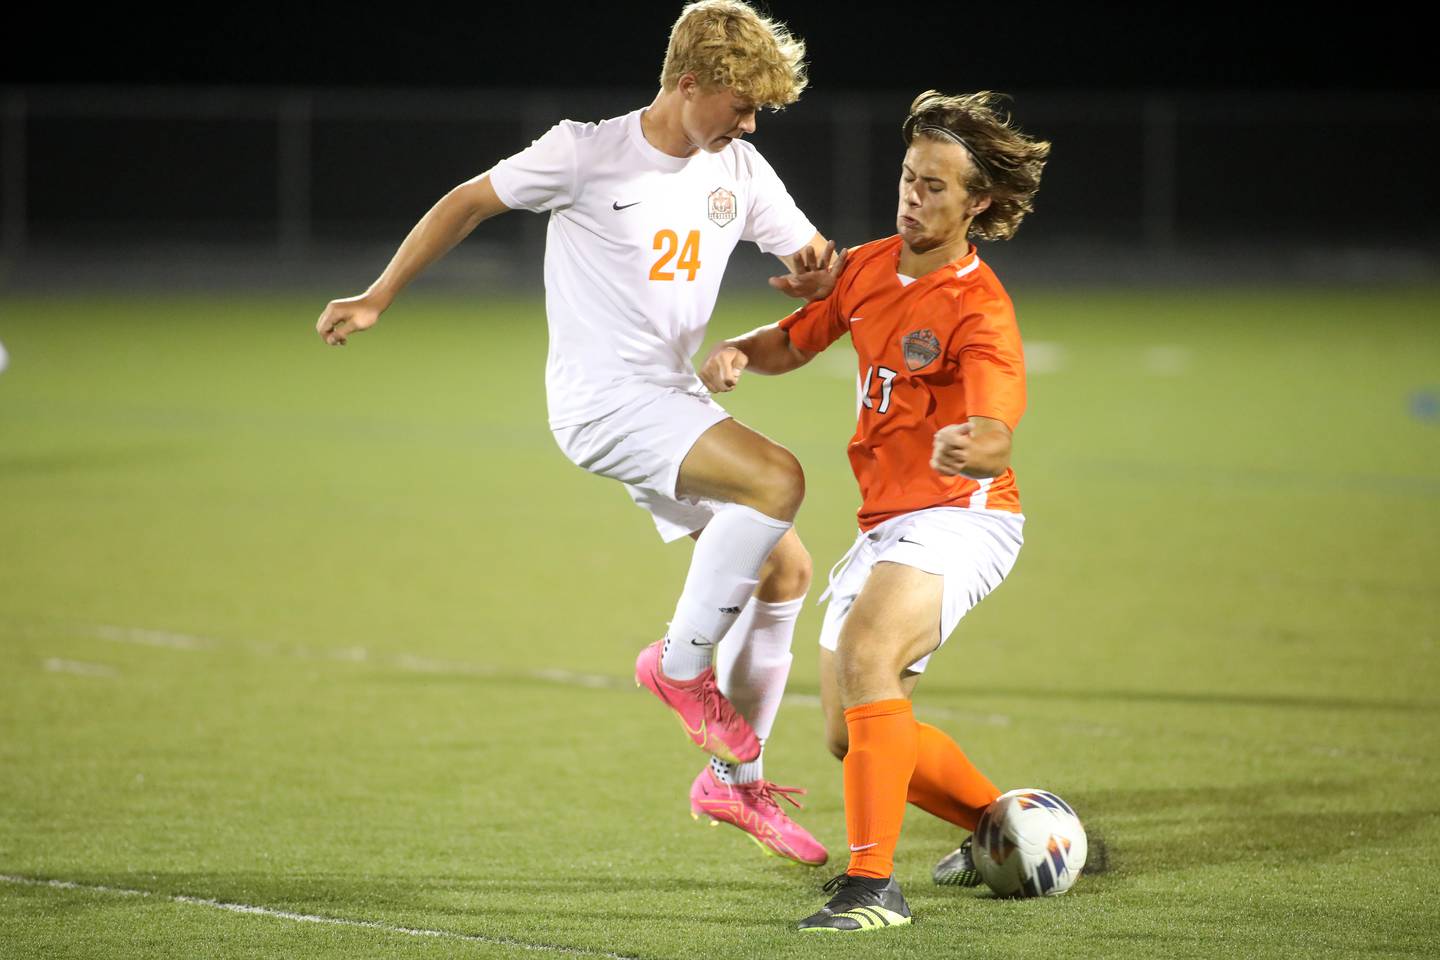 Crystal Lake Central’s Gavin Kane (left) and St. Charles East’s Robert Kutrovatz (right) attack the ball during a game  at Streamwood on Tuesday, Sept. 12, 2023.